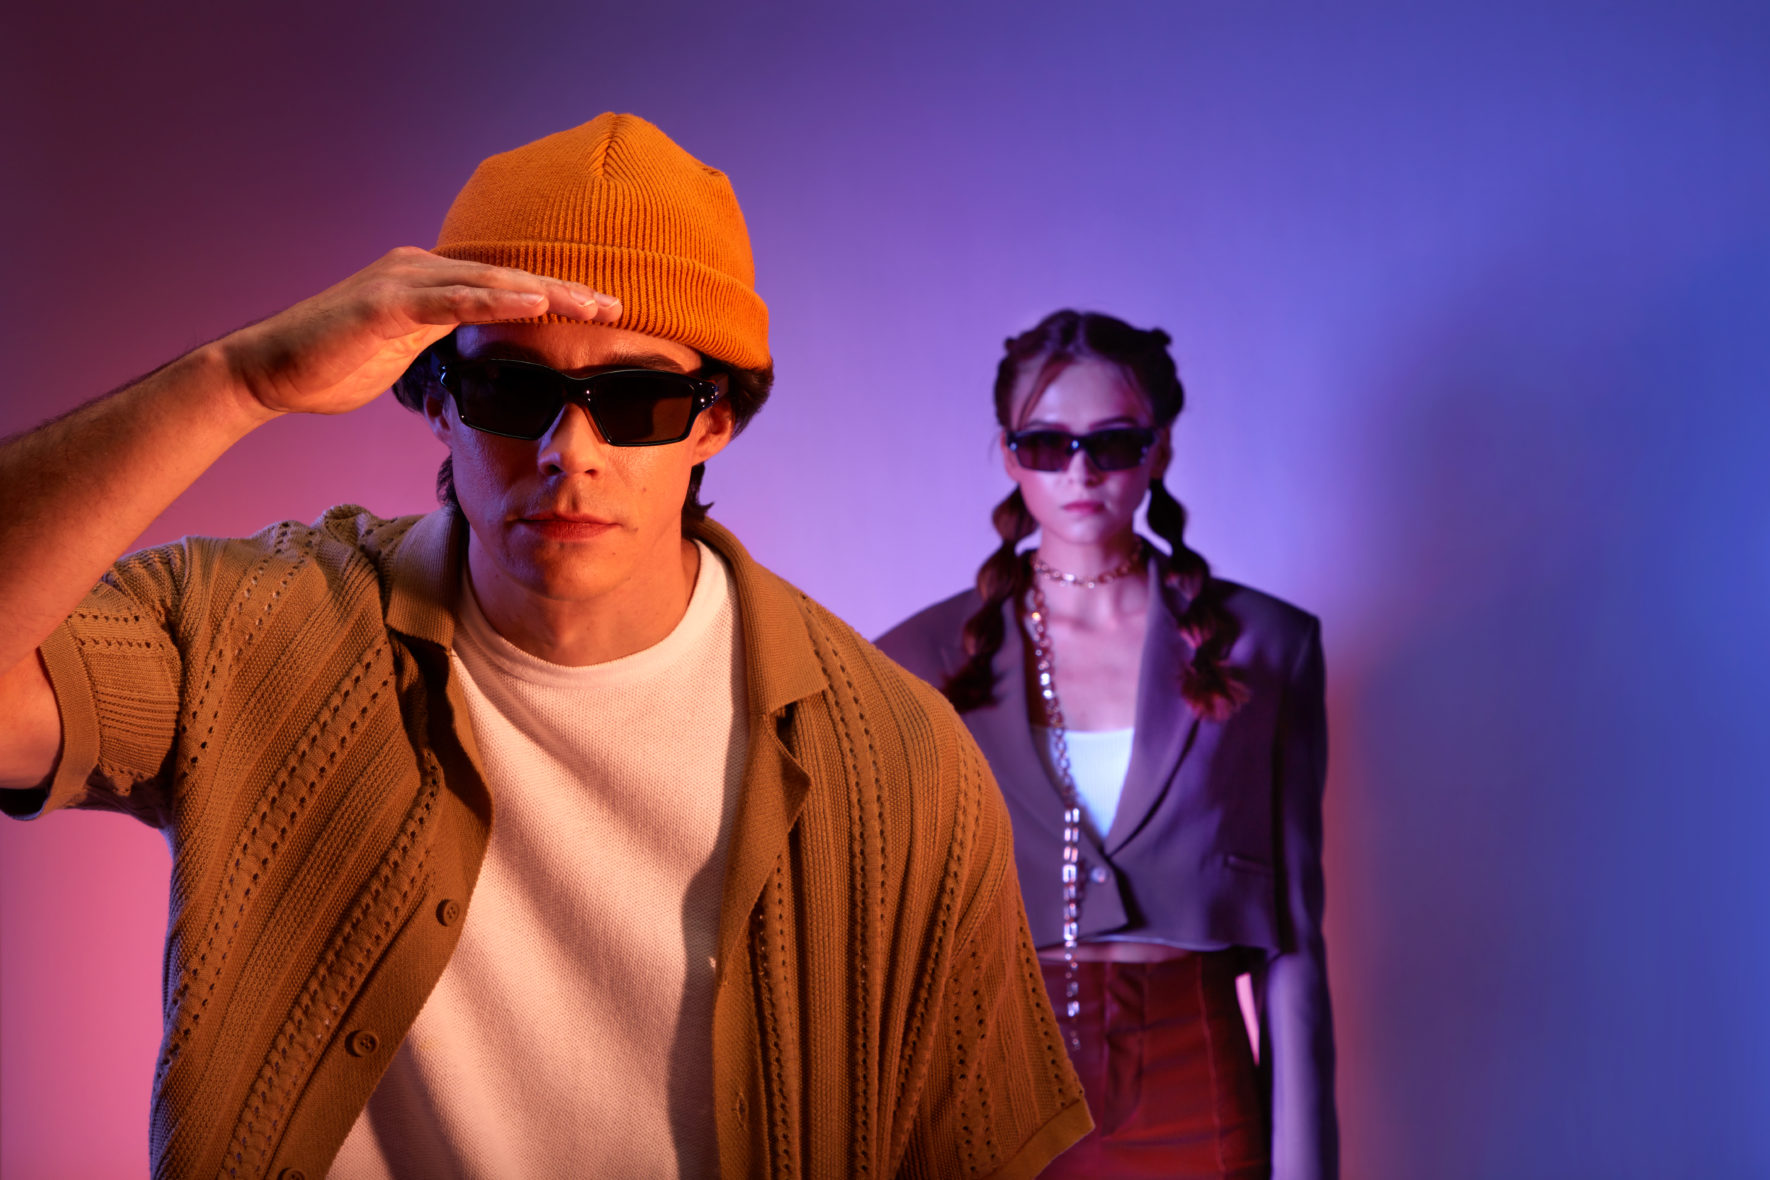 A man and a woman wearing sunglasses, with the man looking into the distance and placing his hand on his forehead. The background features pink and purple colors with a lighting effect. This creative promotional shoot was captured by I Heart Studios.